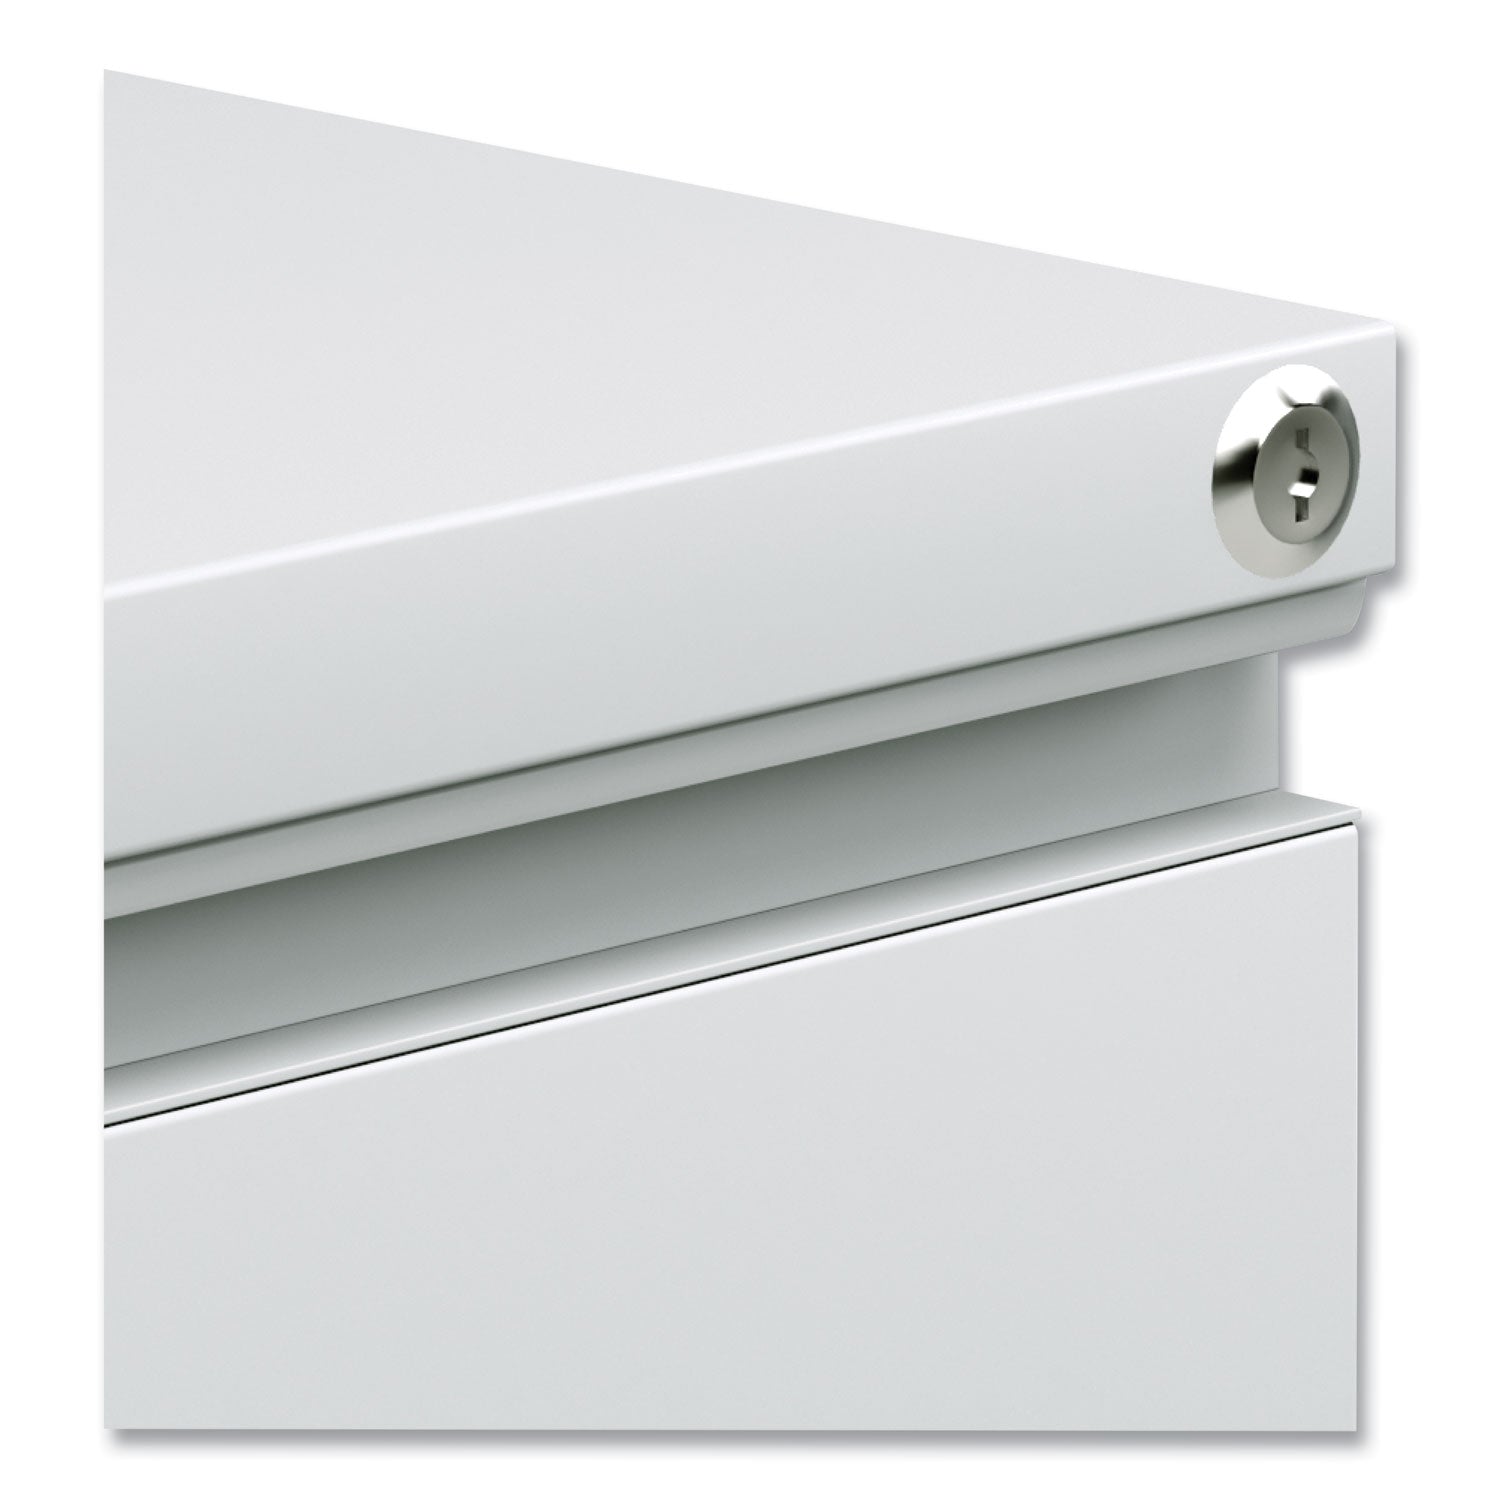 file-pedestal-with-full-length-pull-left-or-right-2-drawers-box-file-legal-letter-light-gray-1496-x-1929-x-2165_alepbbflg - 6